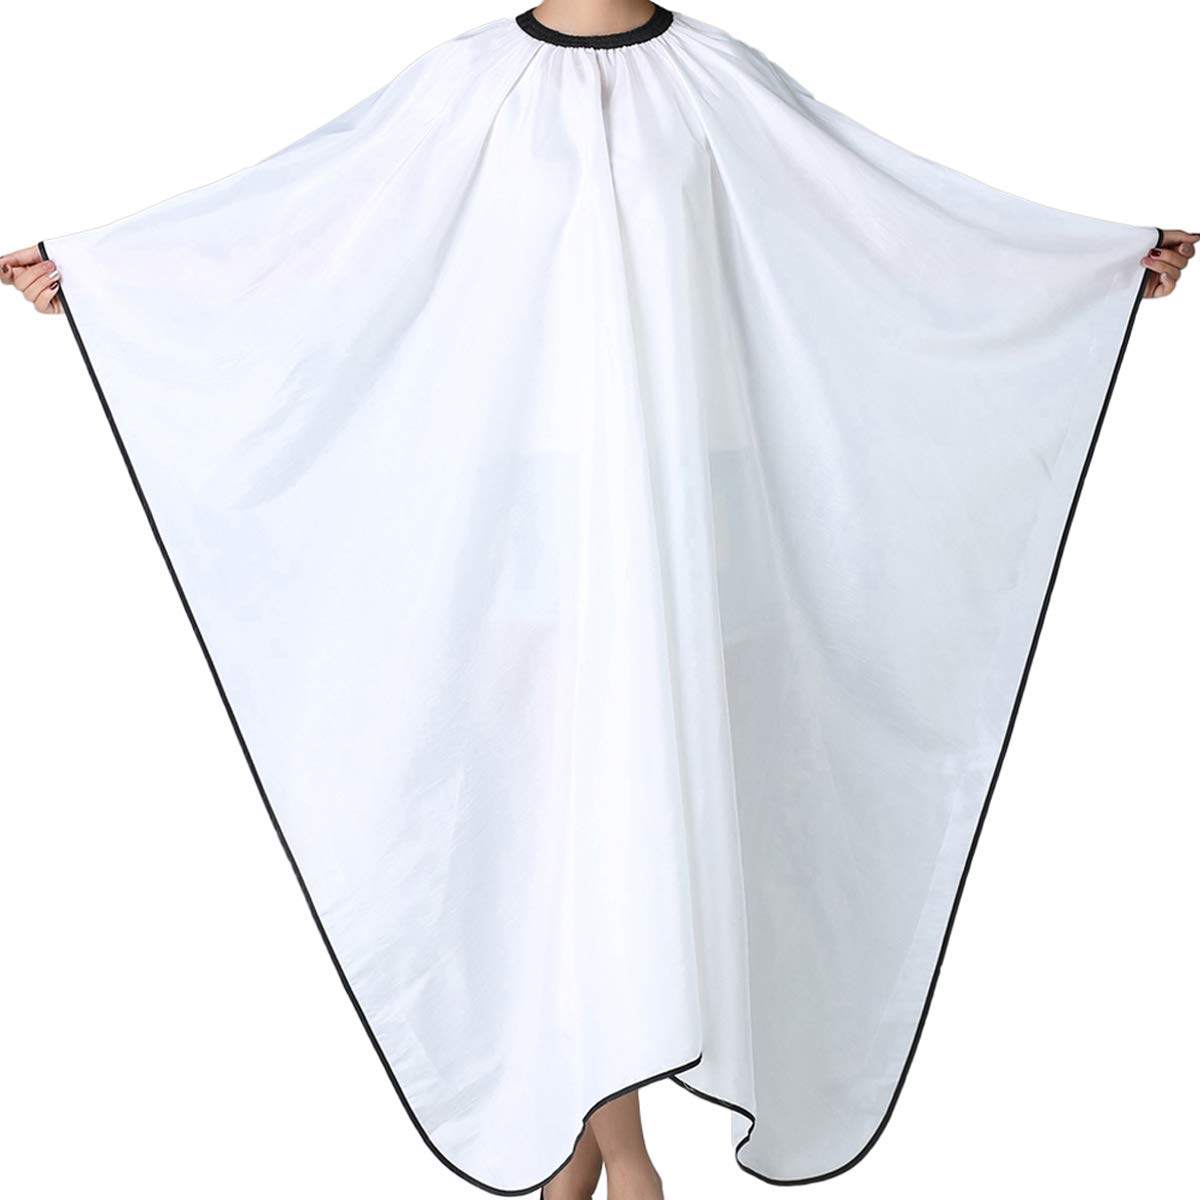 Nylon Hair Cutting Cape Salon Drape Hairdressing Apron - SPLO204 -  IdeaStage Promotional Products